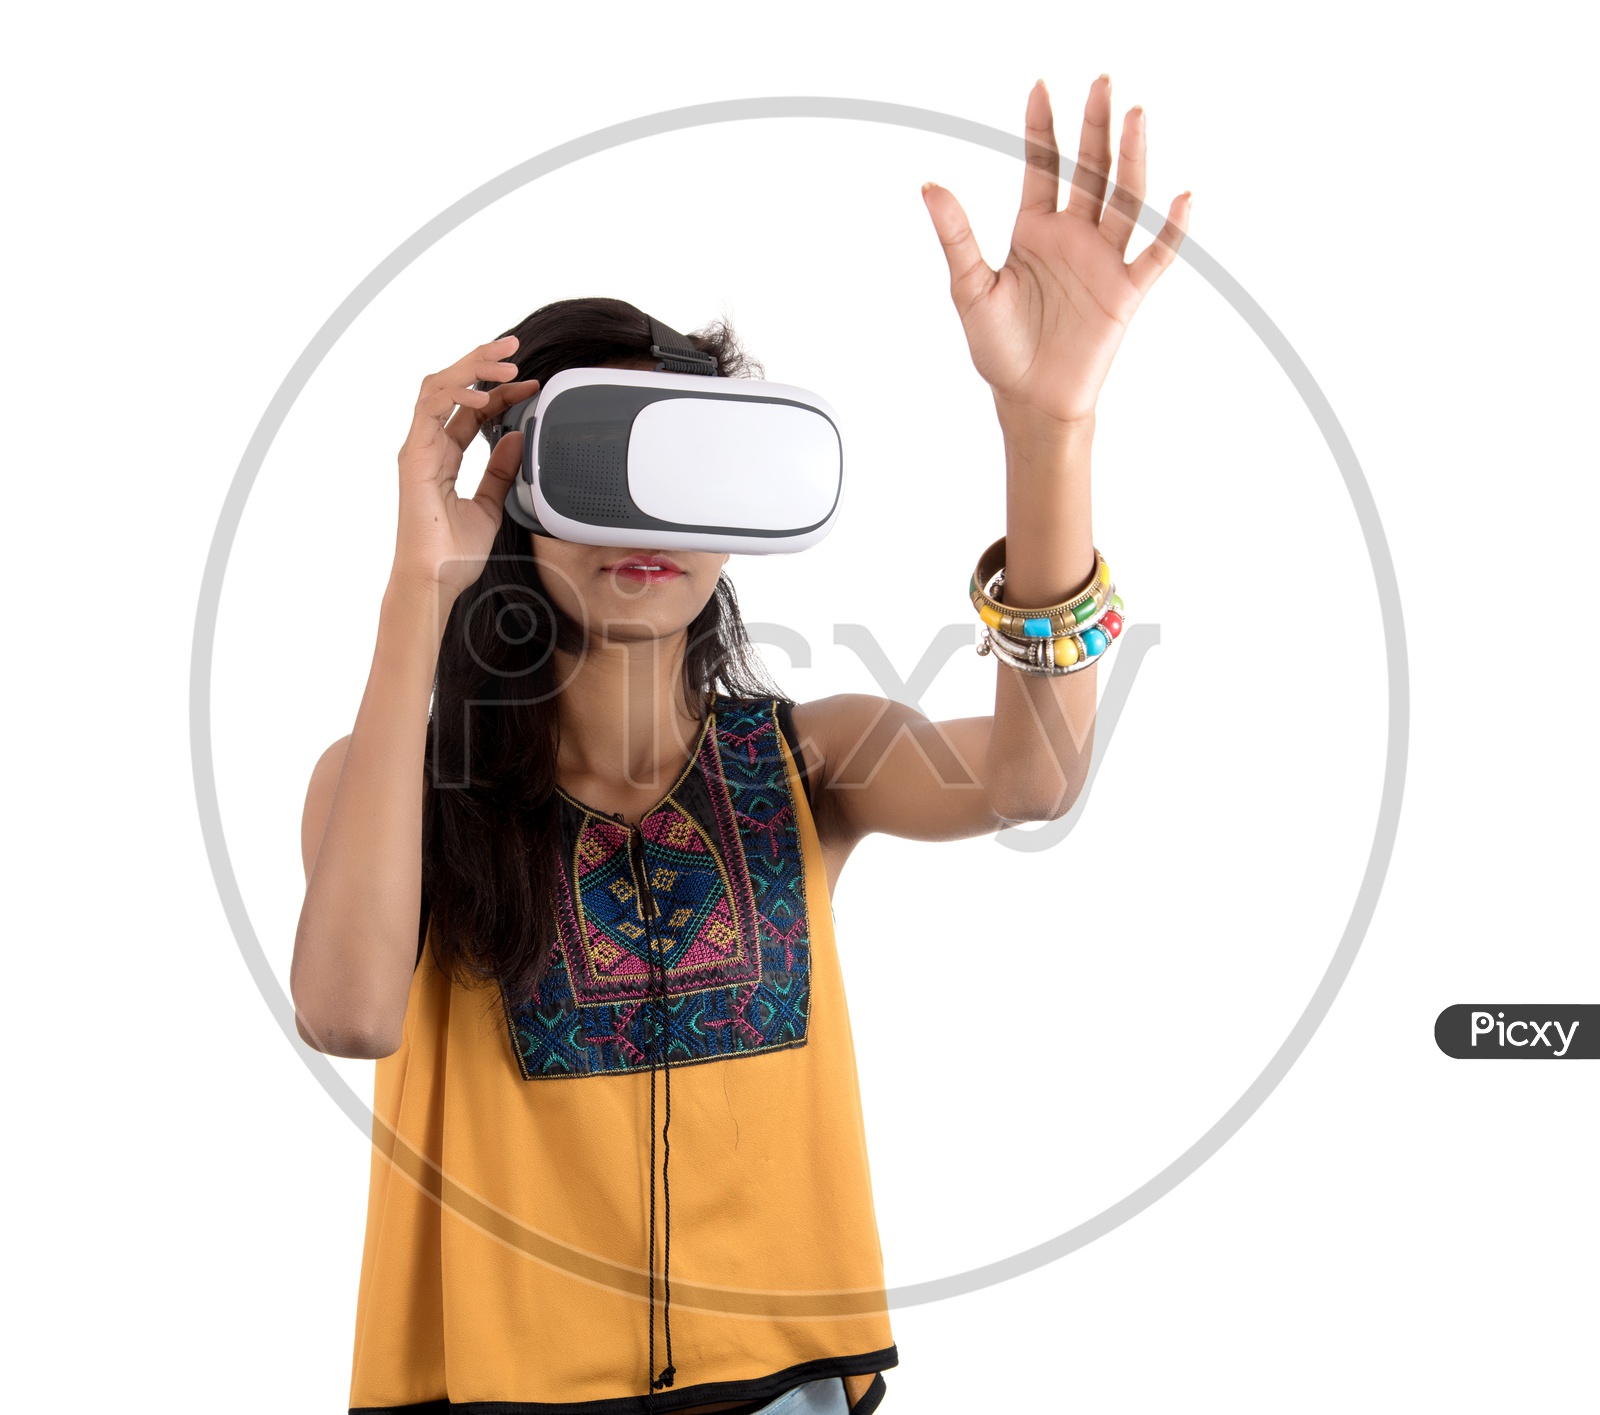 Beautiful Girl Looking Through  VR  Device  or   Young Girl Wearing  Virtual Reality  Goggle Headset  on an Isolated White Background